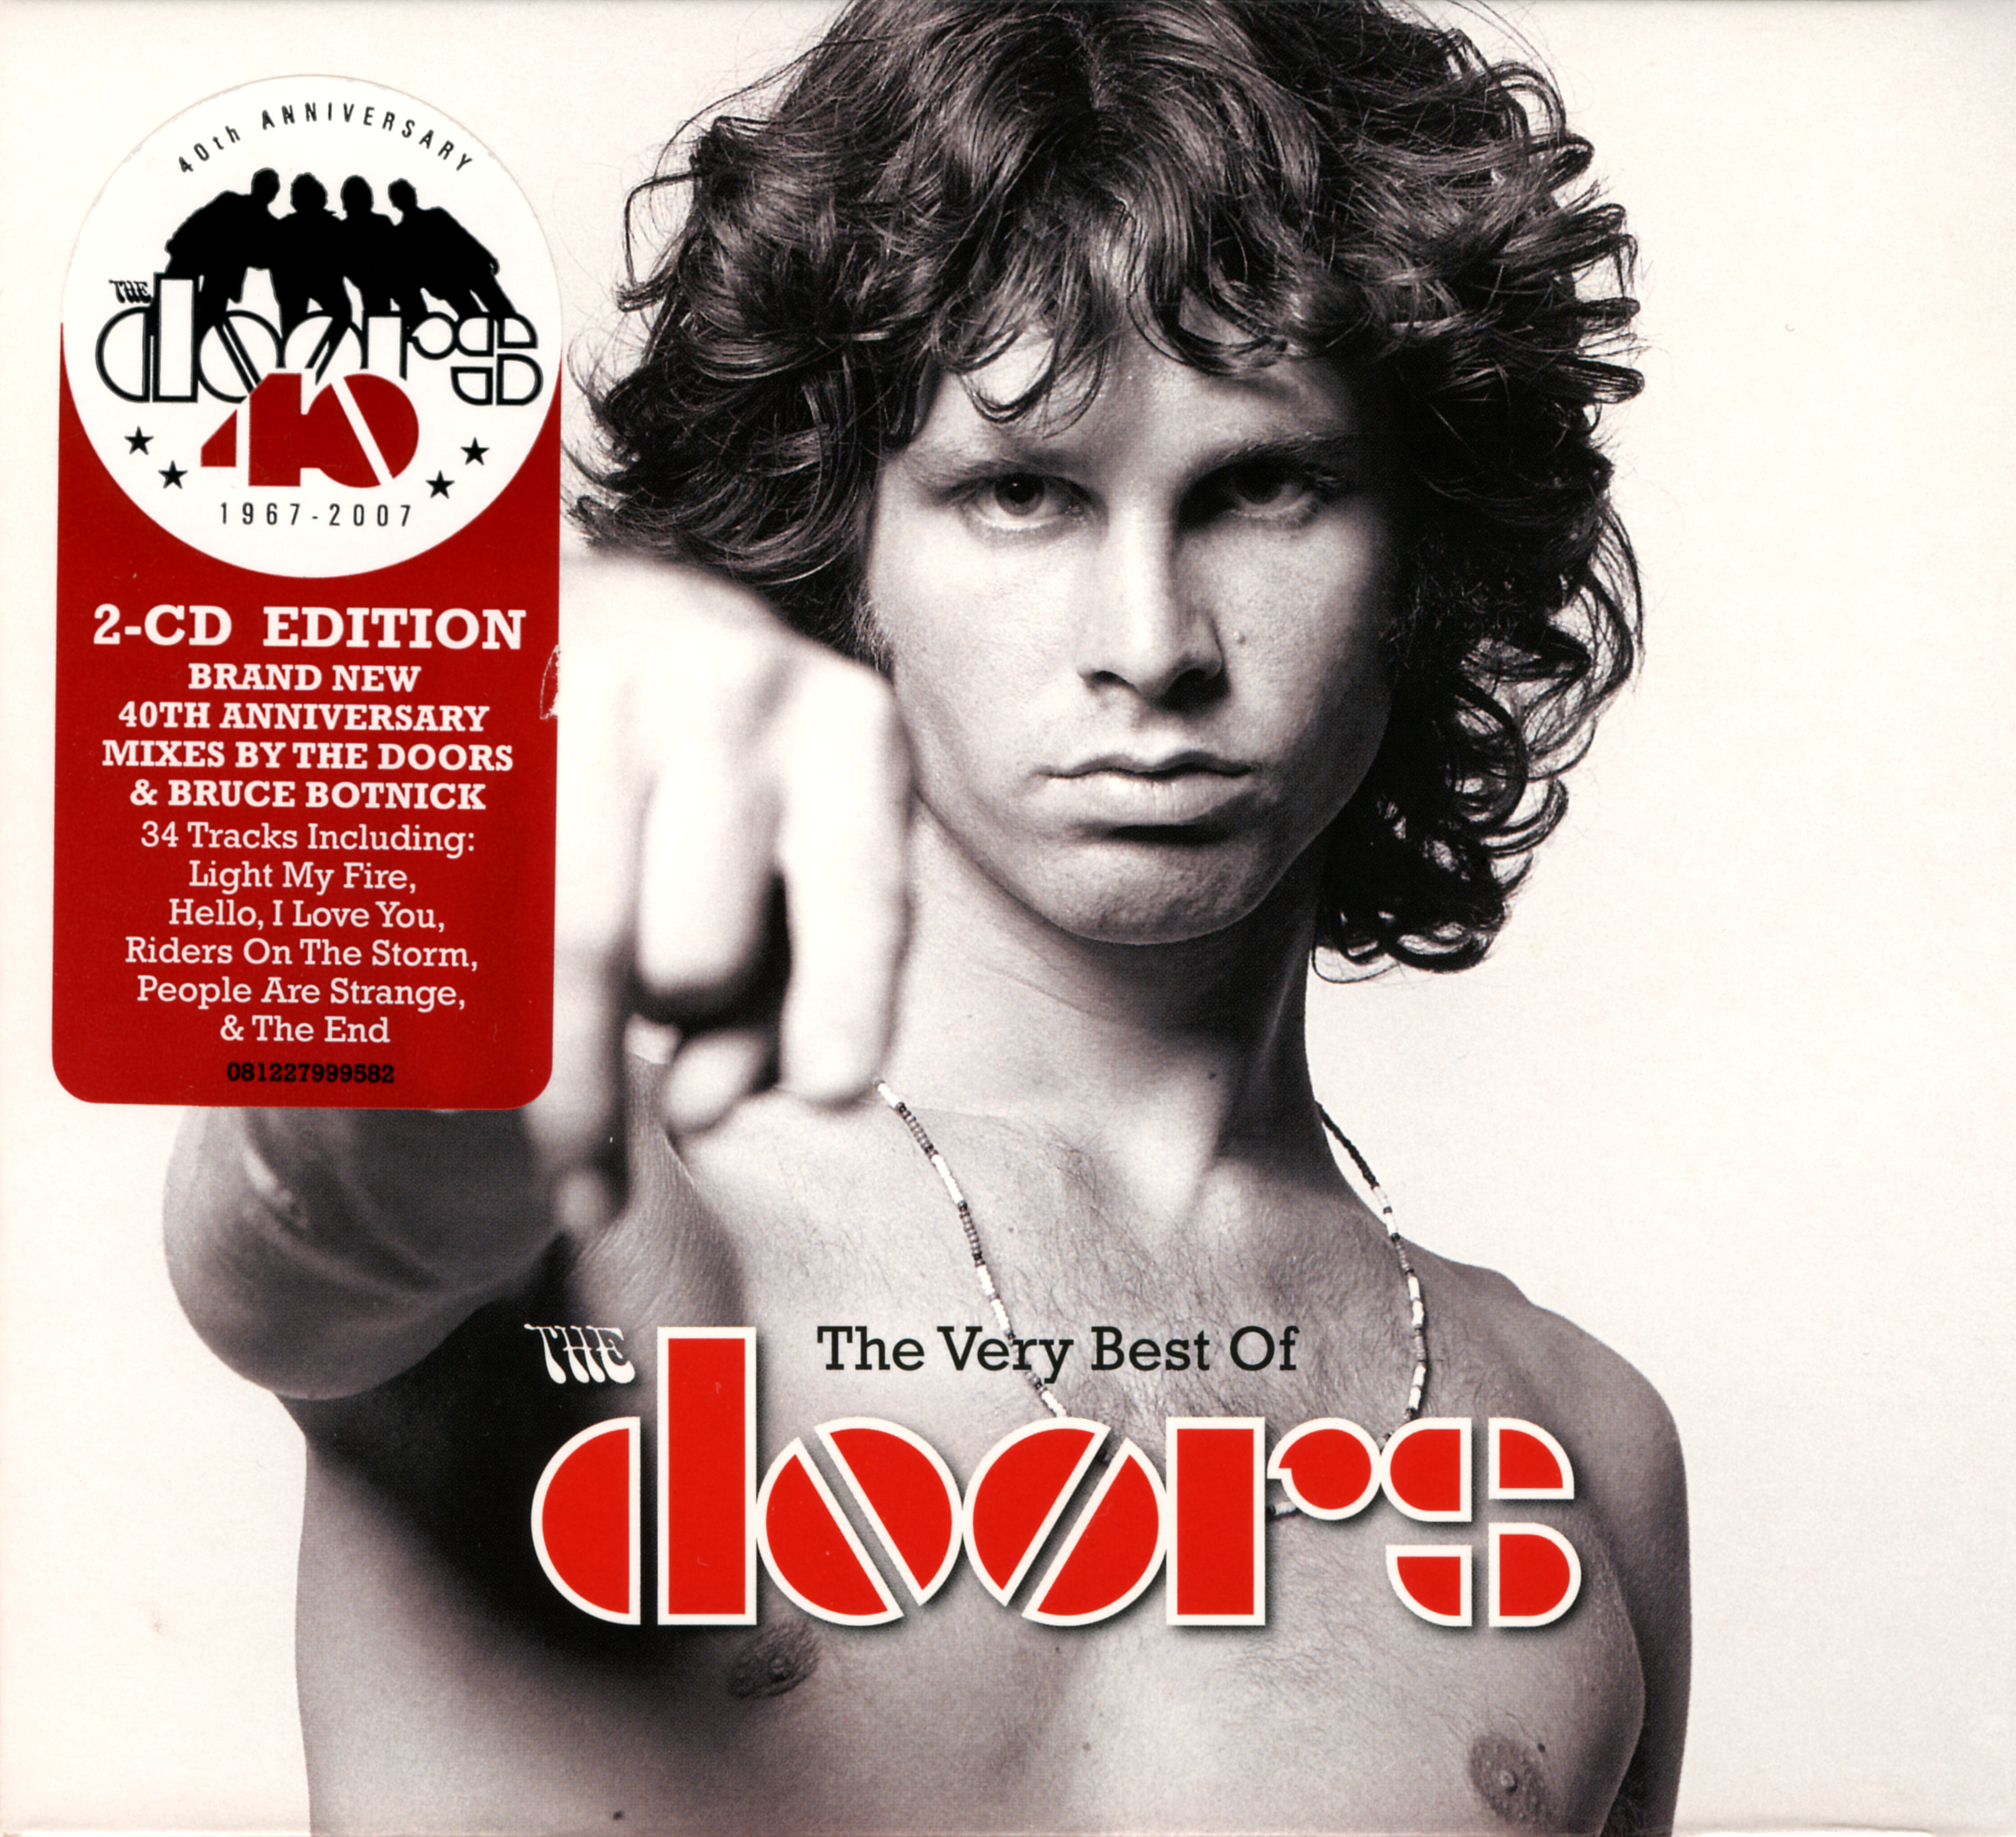 Doors, The - The Doors - The Very Best Of (40th Anniversary Edition) (2CD & DVD) cover